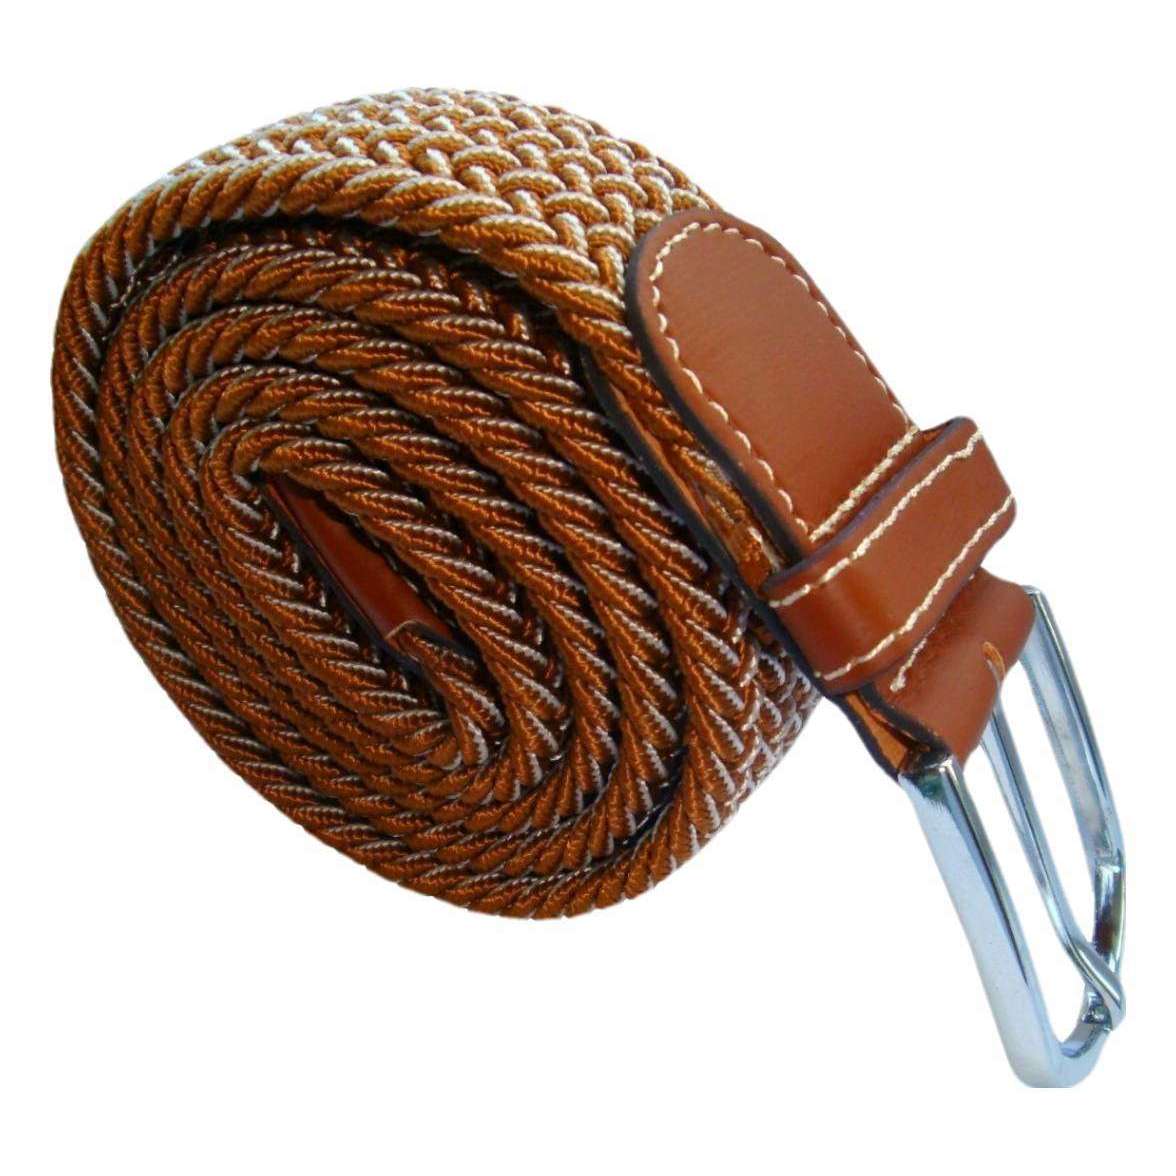 Bassin and Brown Chevron Lined Woven Buckle Belt - Light Brown/White